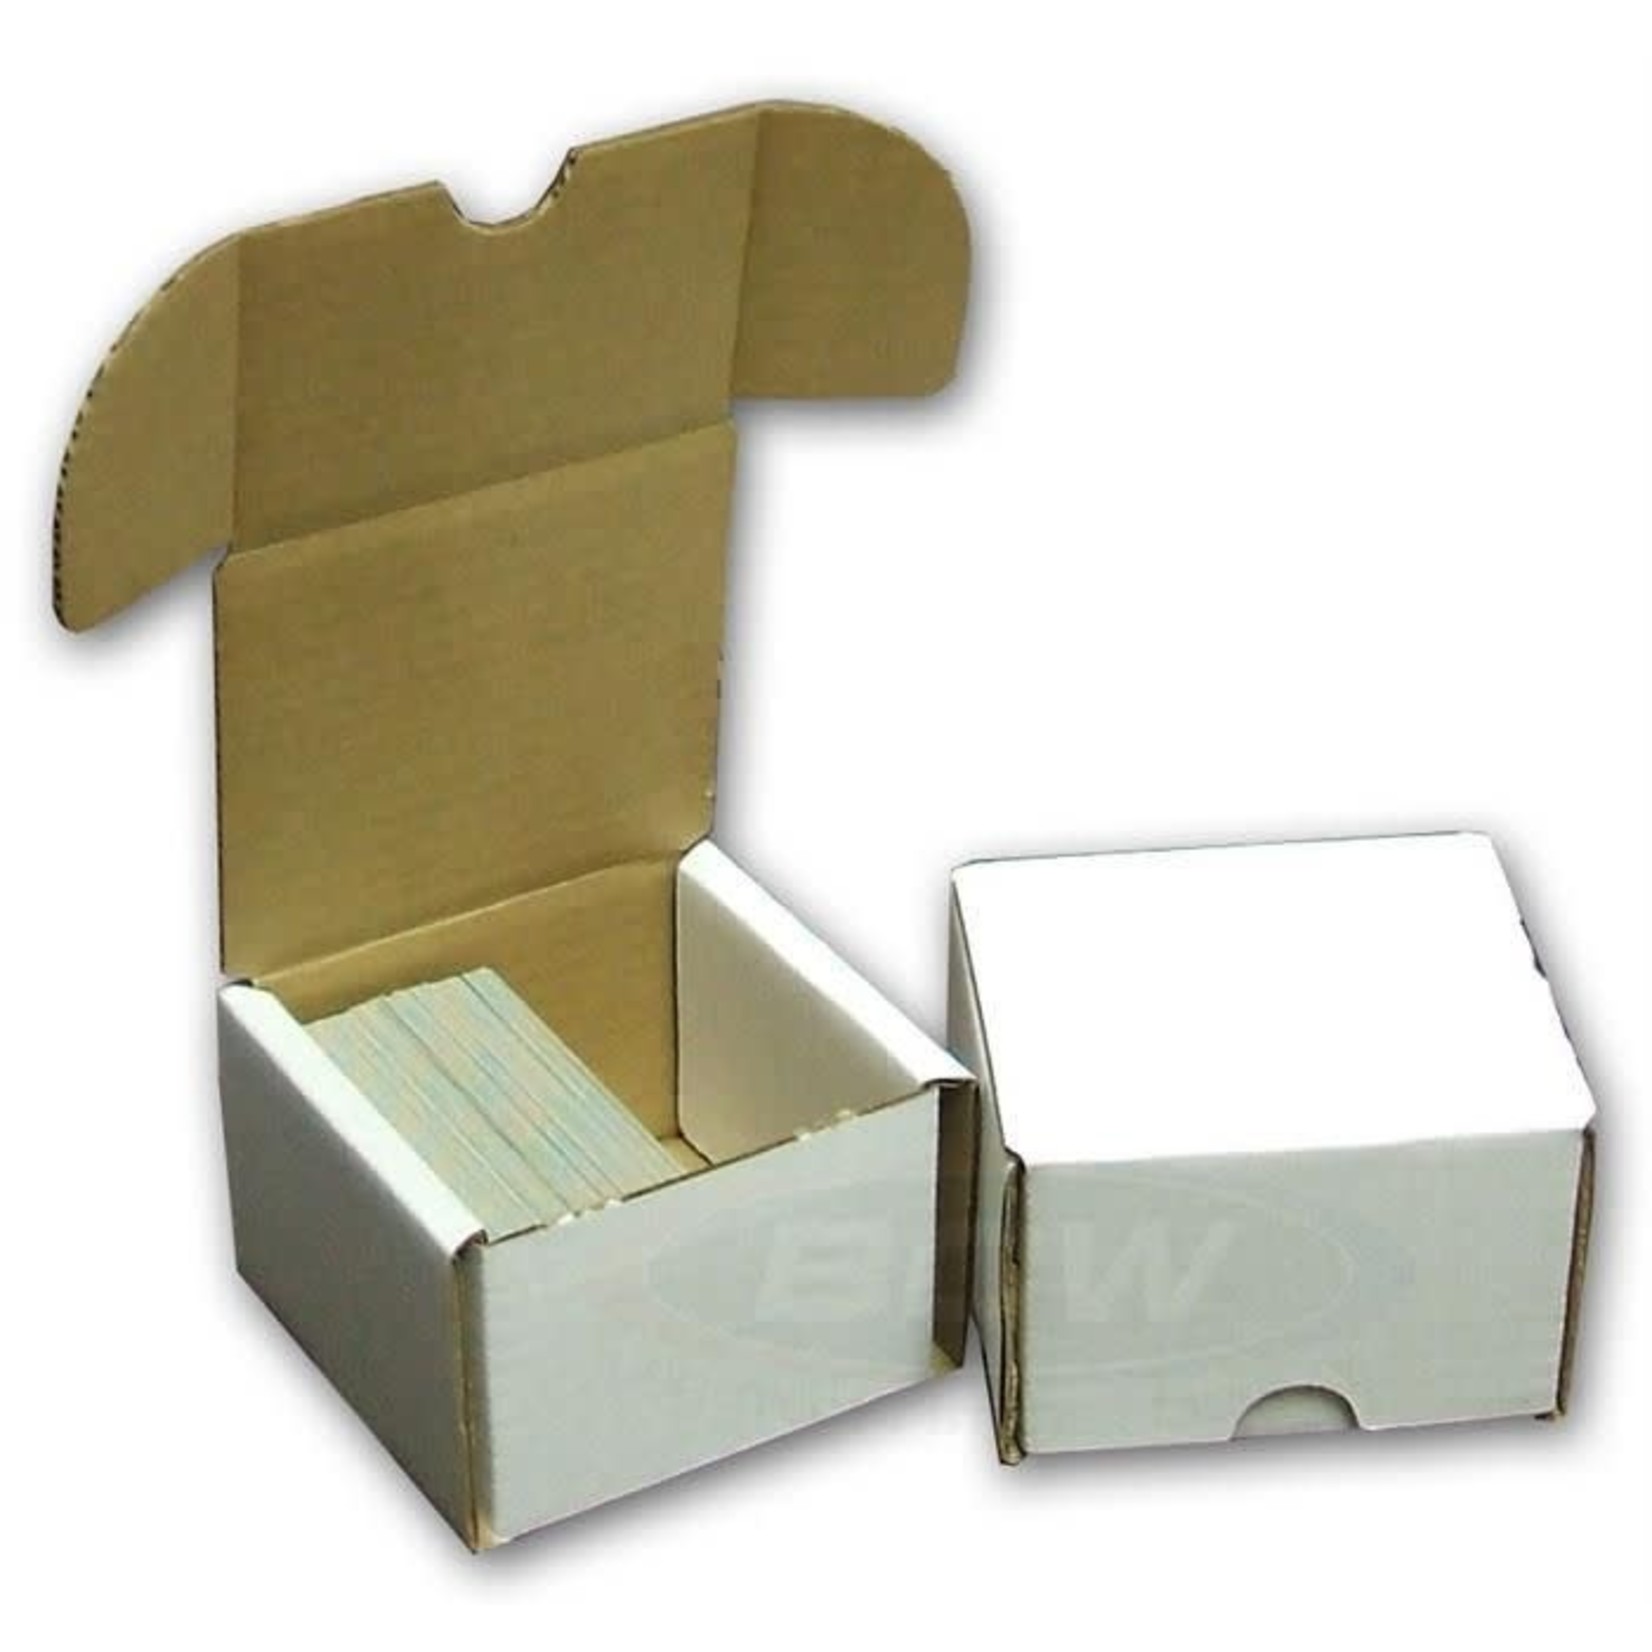 BCW Cardboard Storage Box (Fits 175 Standard Trading or 280 Collectible Cards per Box)